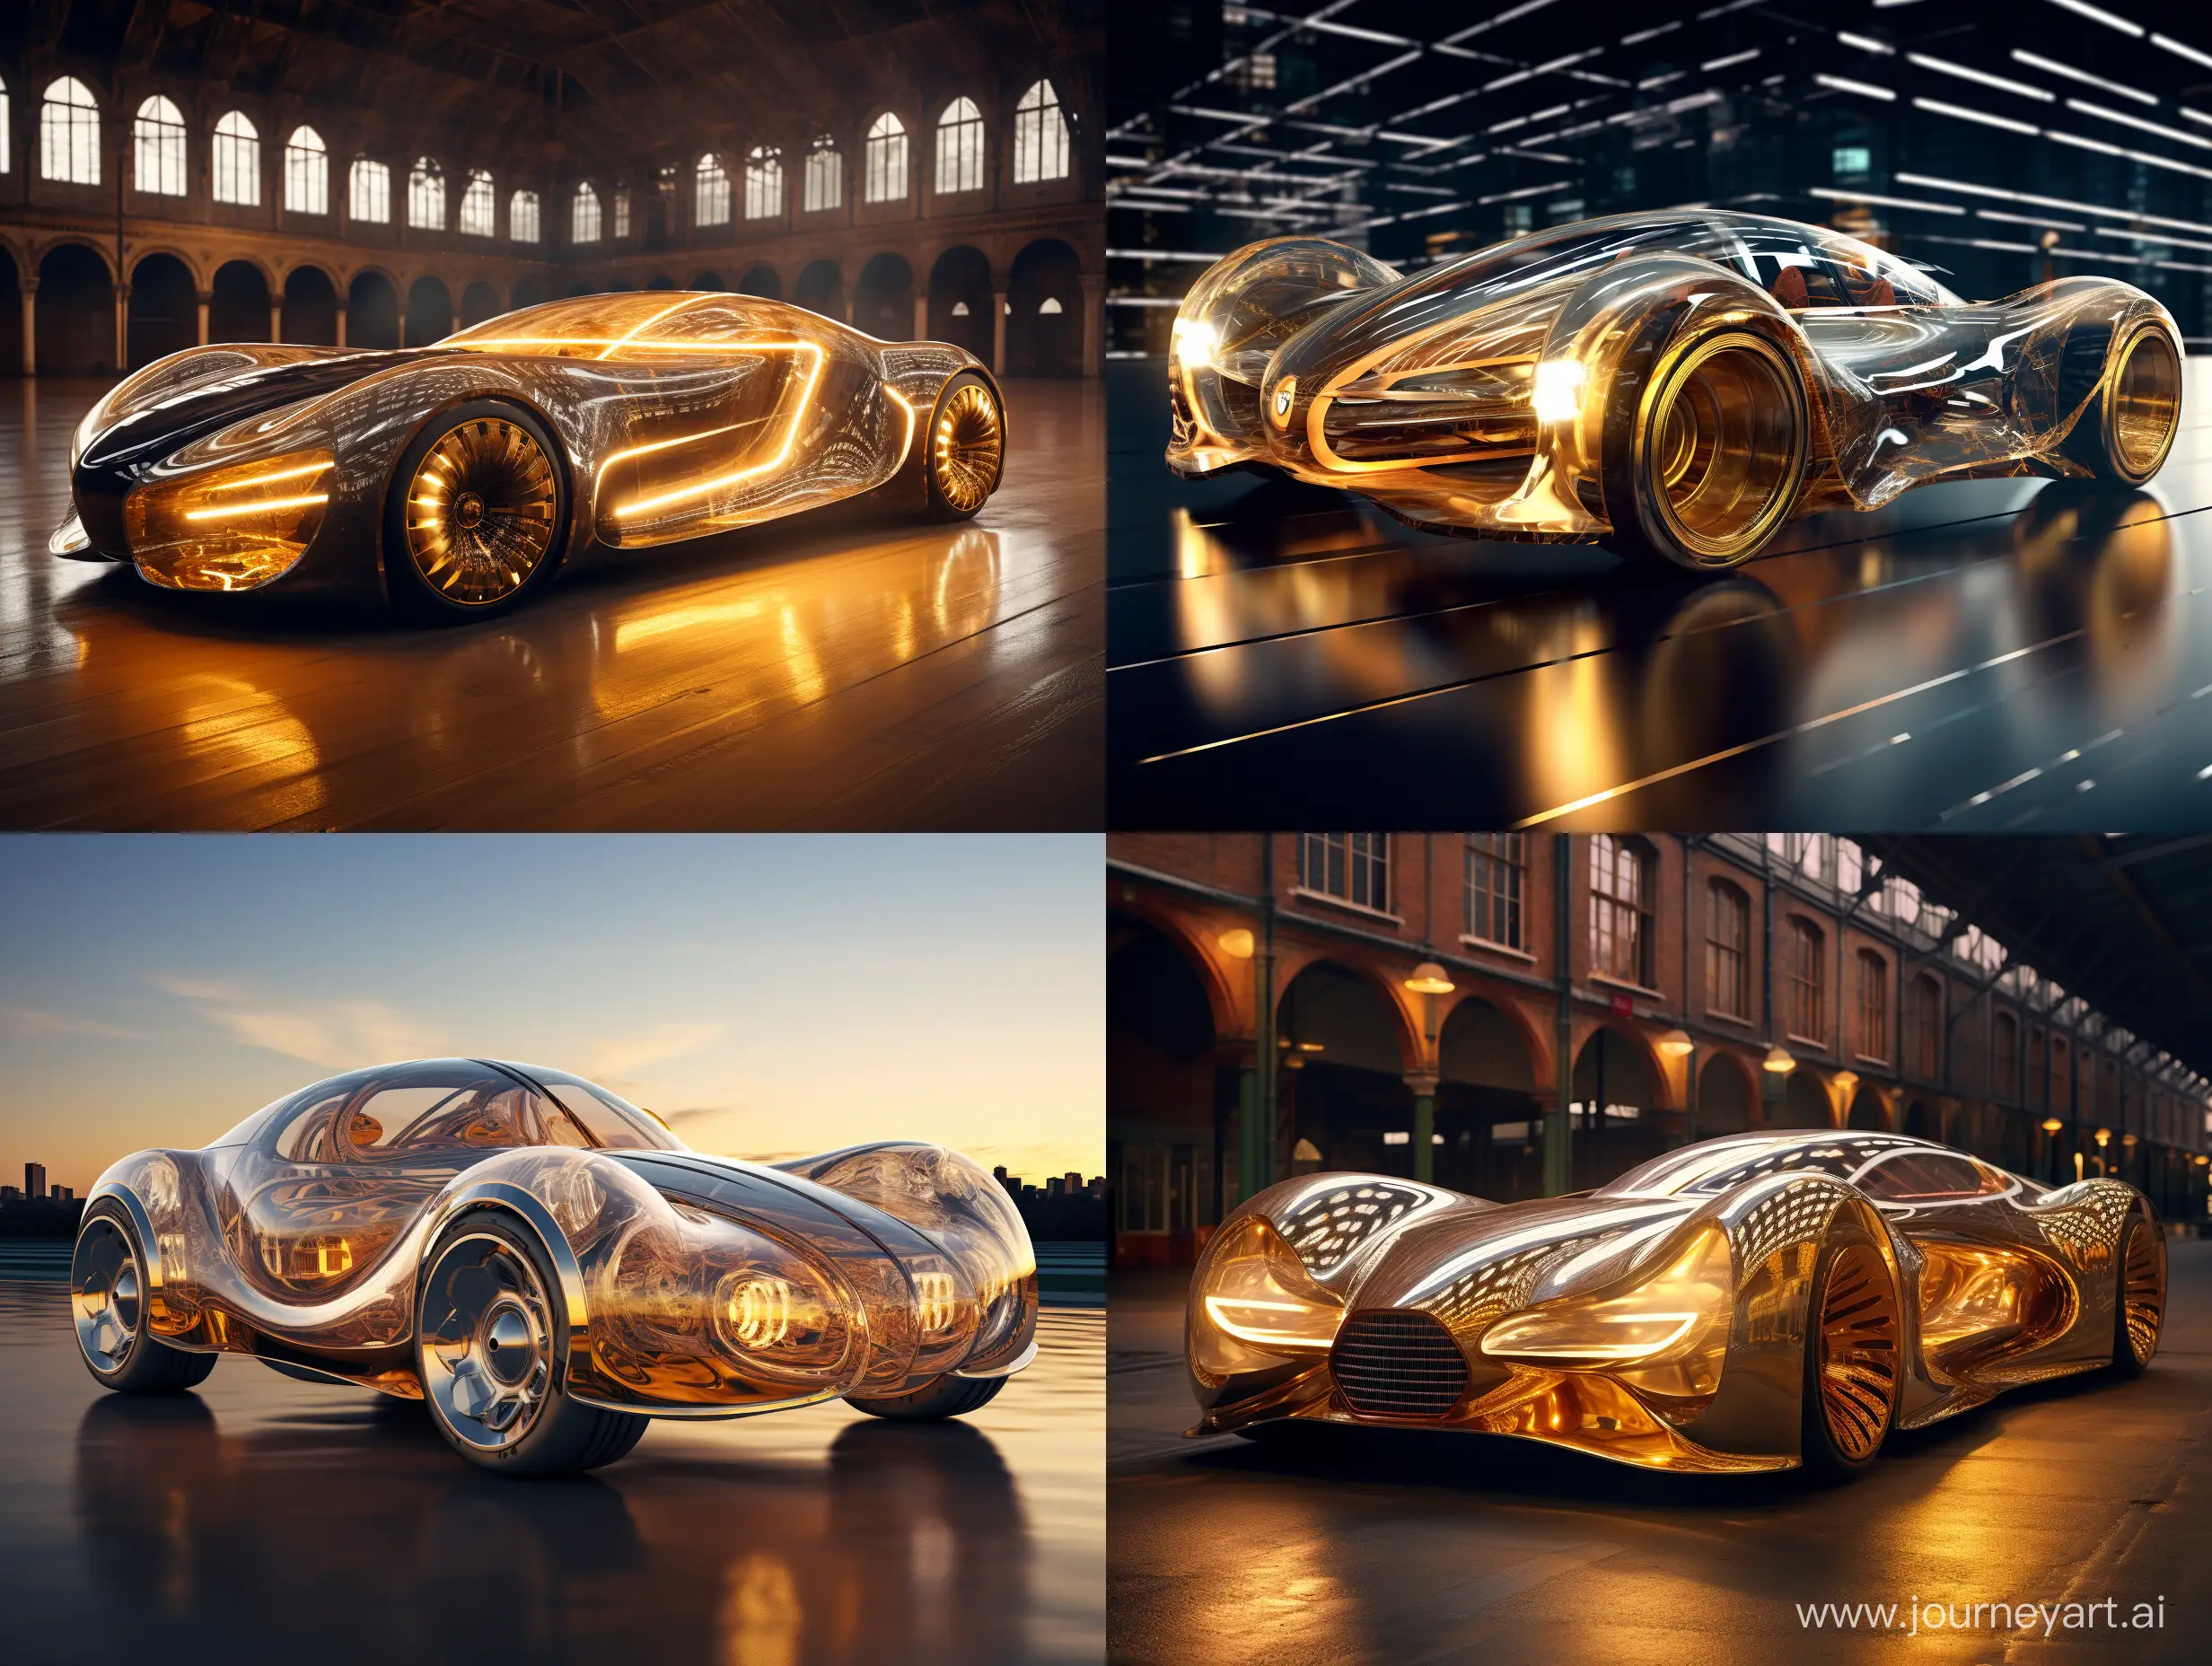 an image of a biomechanical translucent car, with golden lights, in the style of vray tracing, polished craftsmanship, fluid organic forms, lens flare, award winning, abstract formulations, leica r8, mechanical designs, metallic rotation, Thomas Heatherwick